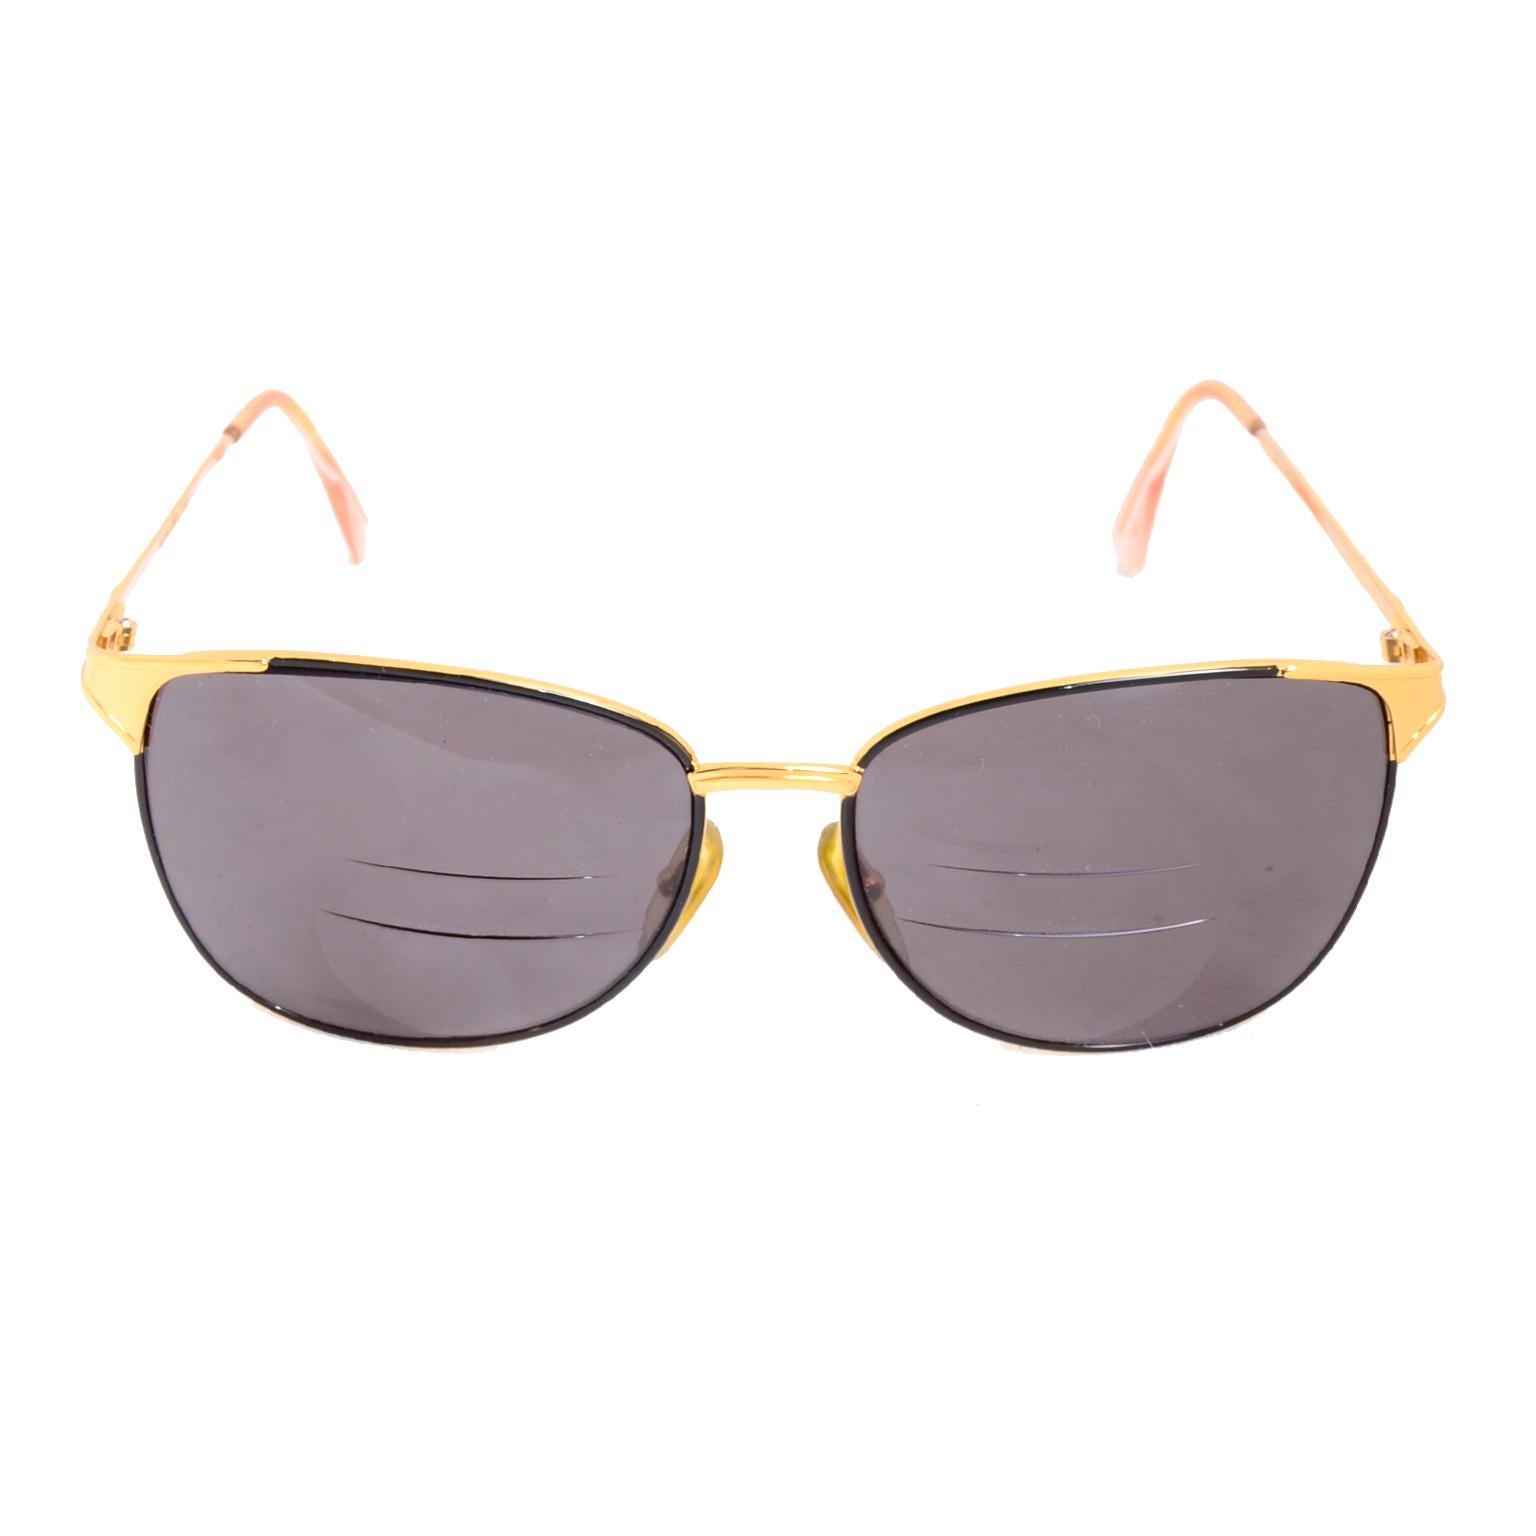 These are lovely Laura Biagiotti gold rim sunglasses.  The lenses are prescription so you would need to have them changed to fit your personal need - either with regular sunglass lenses or your own prescription.  Marked:  T 601/6 PO5 Made in Italy